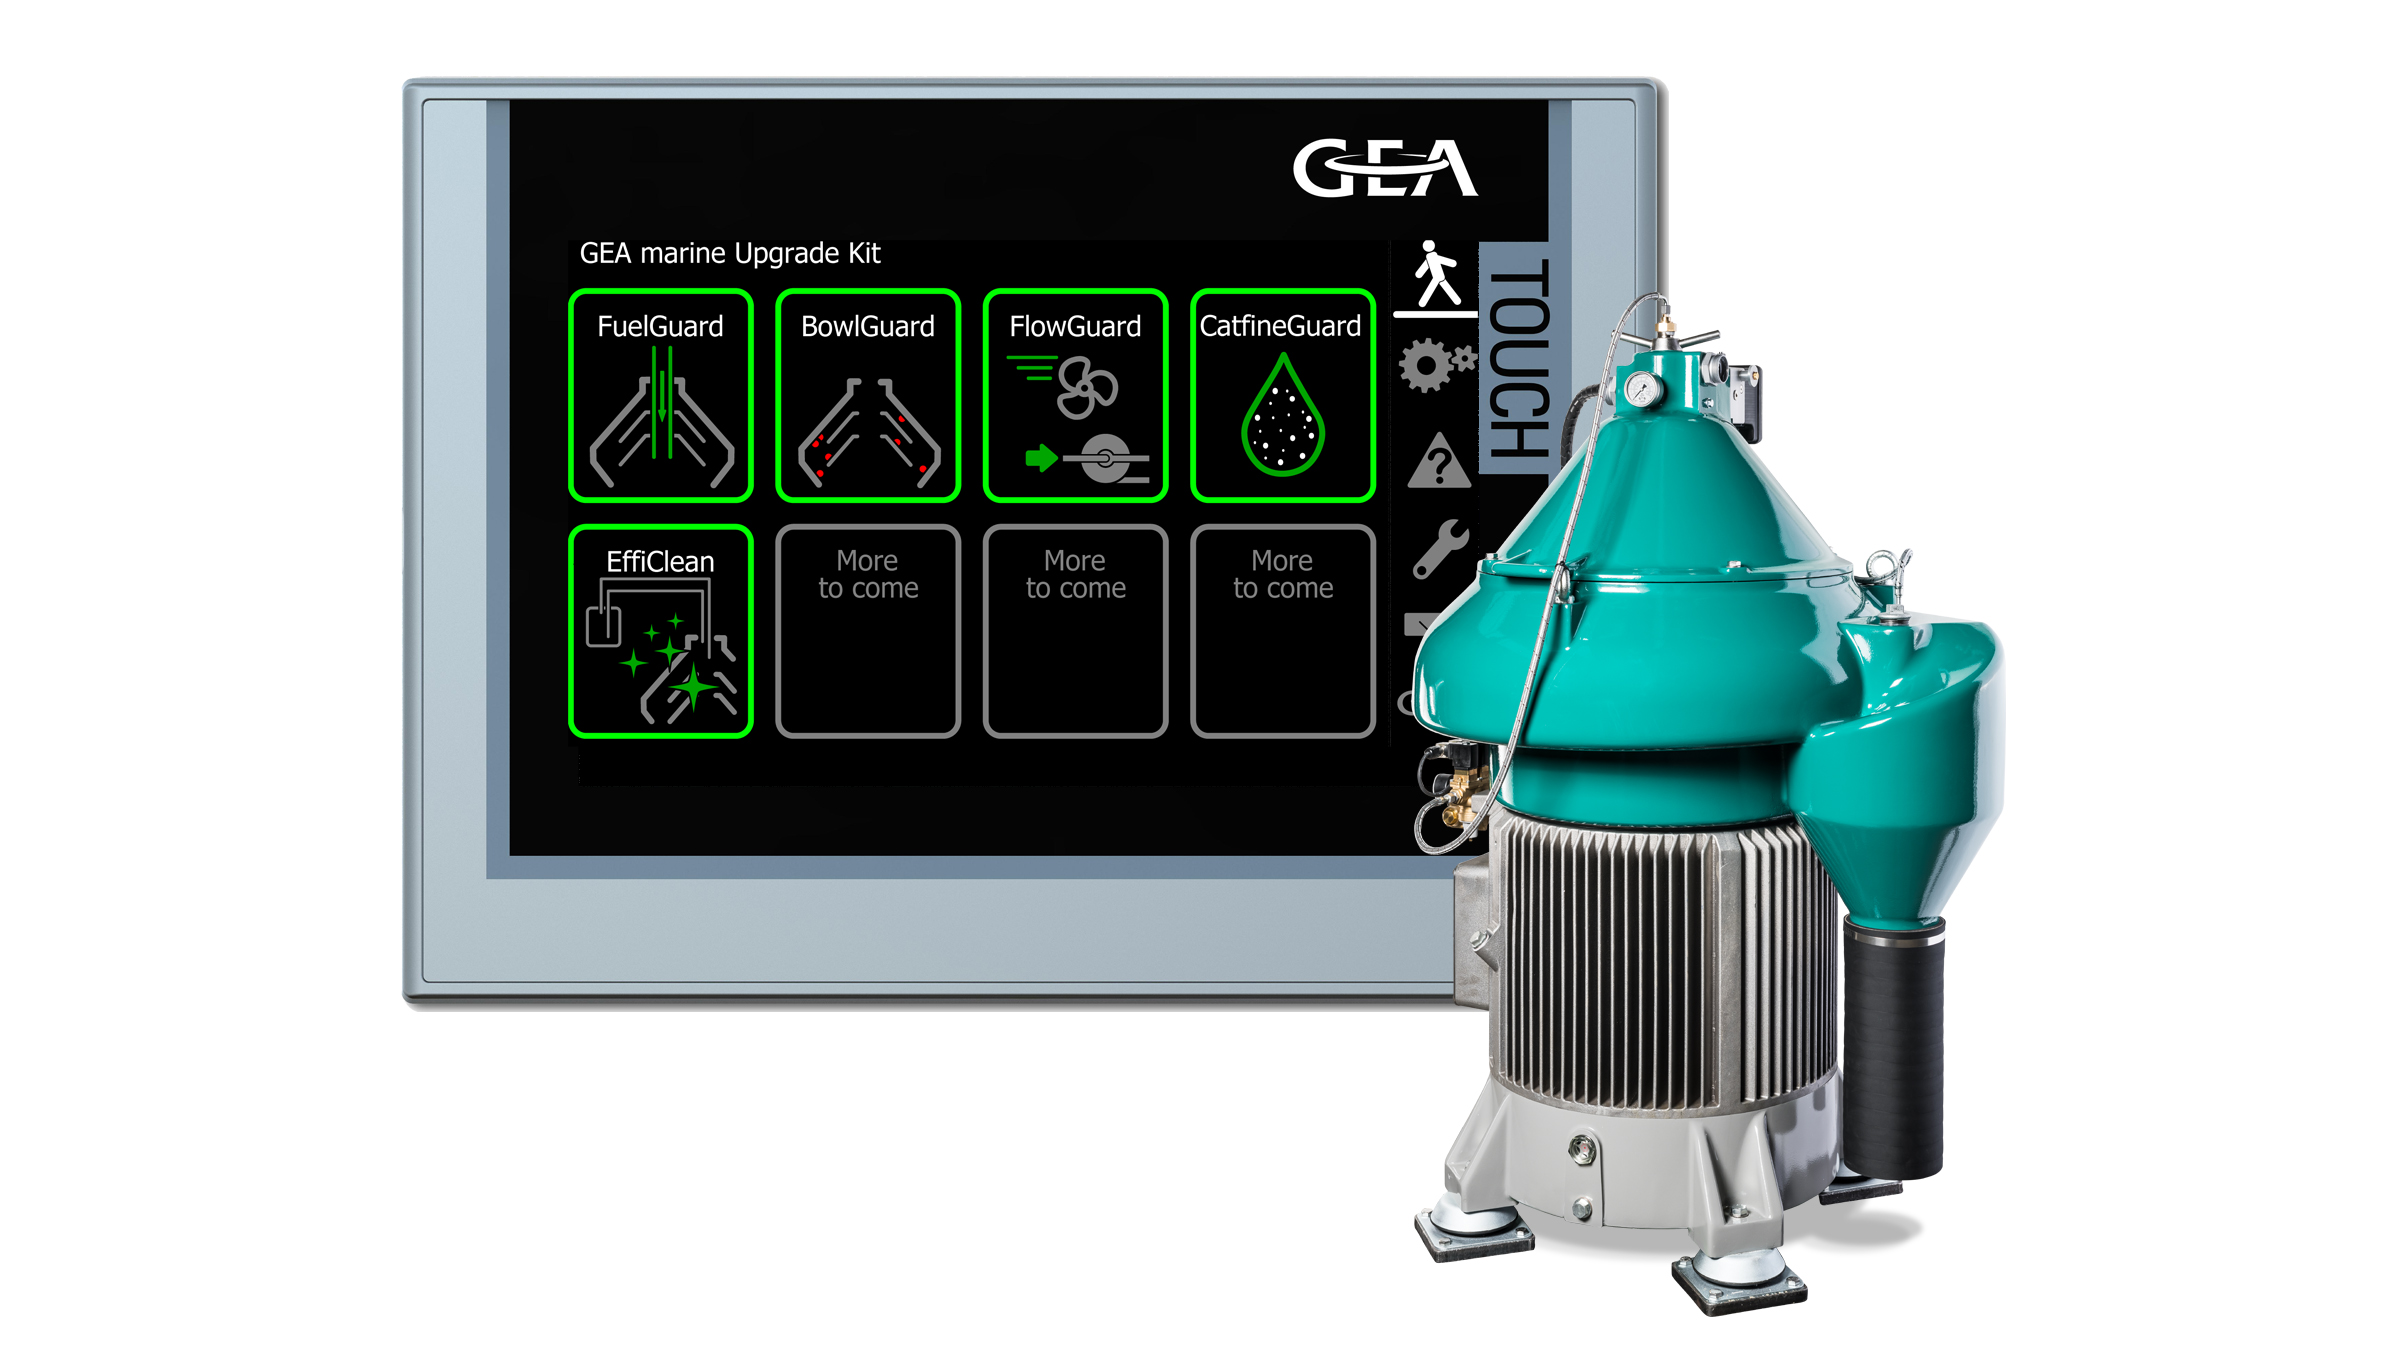 GEA automates the functionality of its separators for marine applications with a new Upgrade Kit. (Image: GEA)